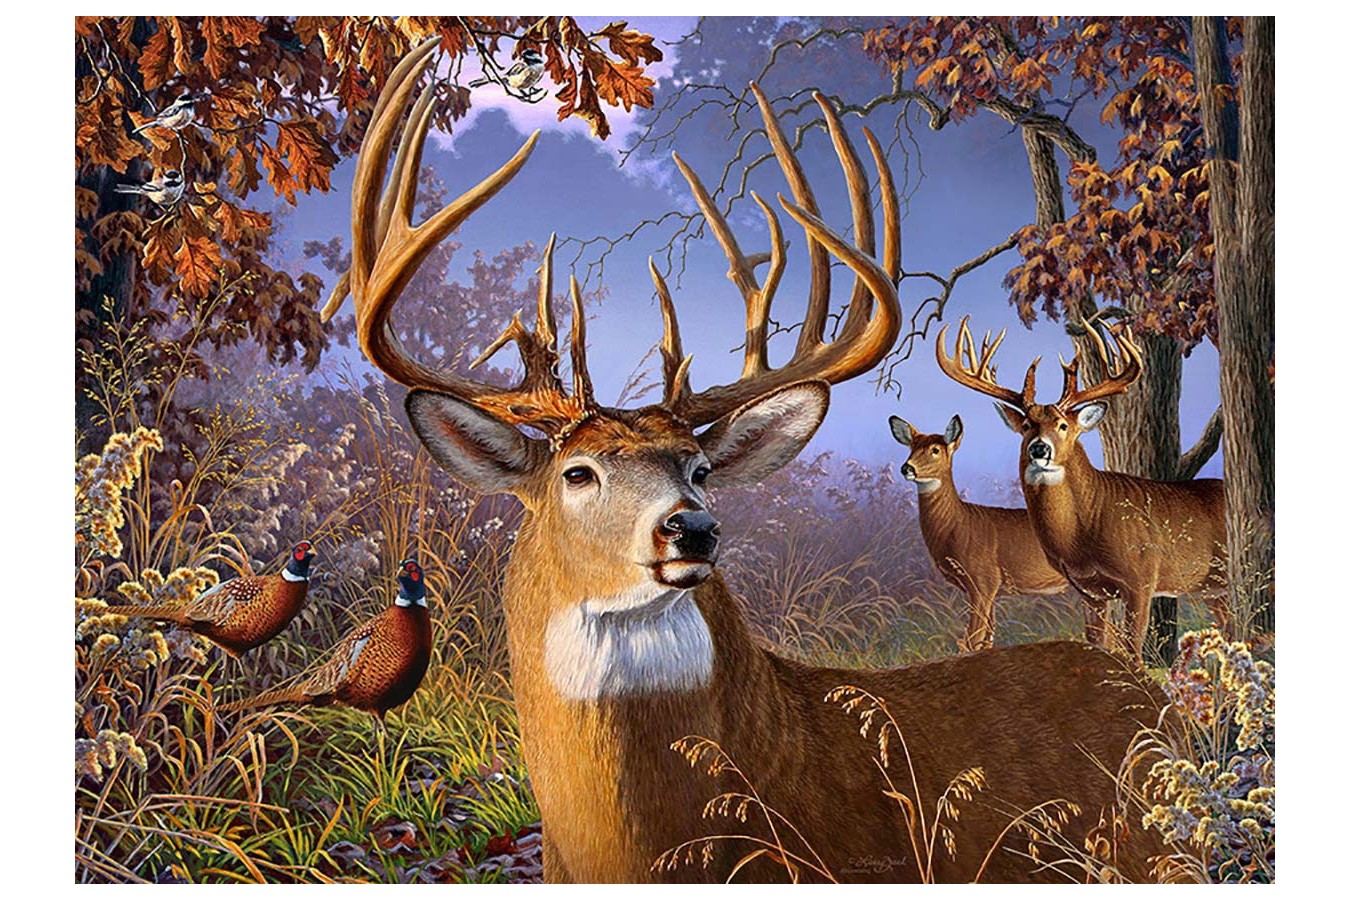 Puzzle Cobble Hill - Deer and Pheasant, 500 piese XXL (Cobble-Hill-85054)